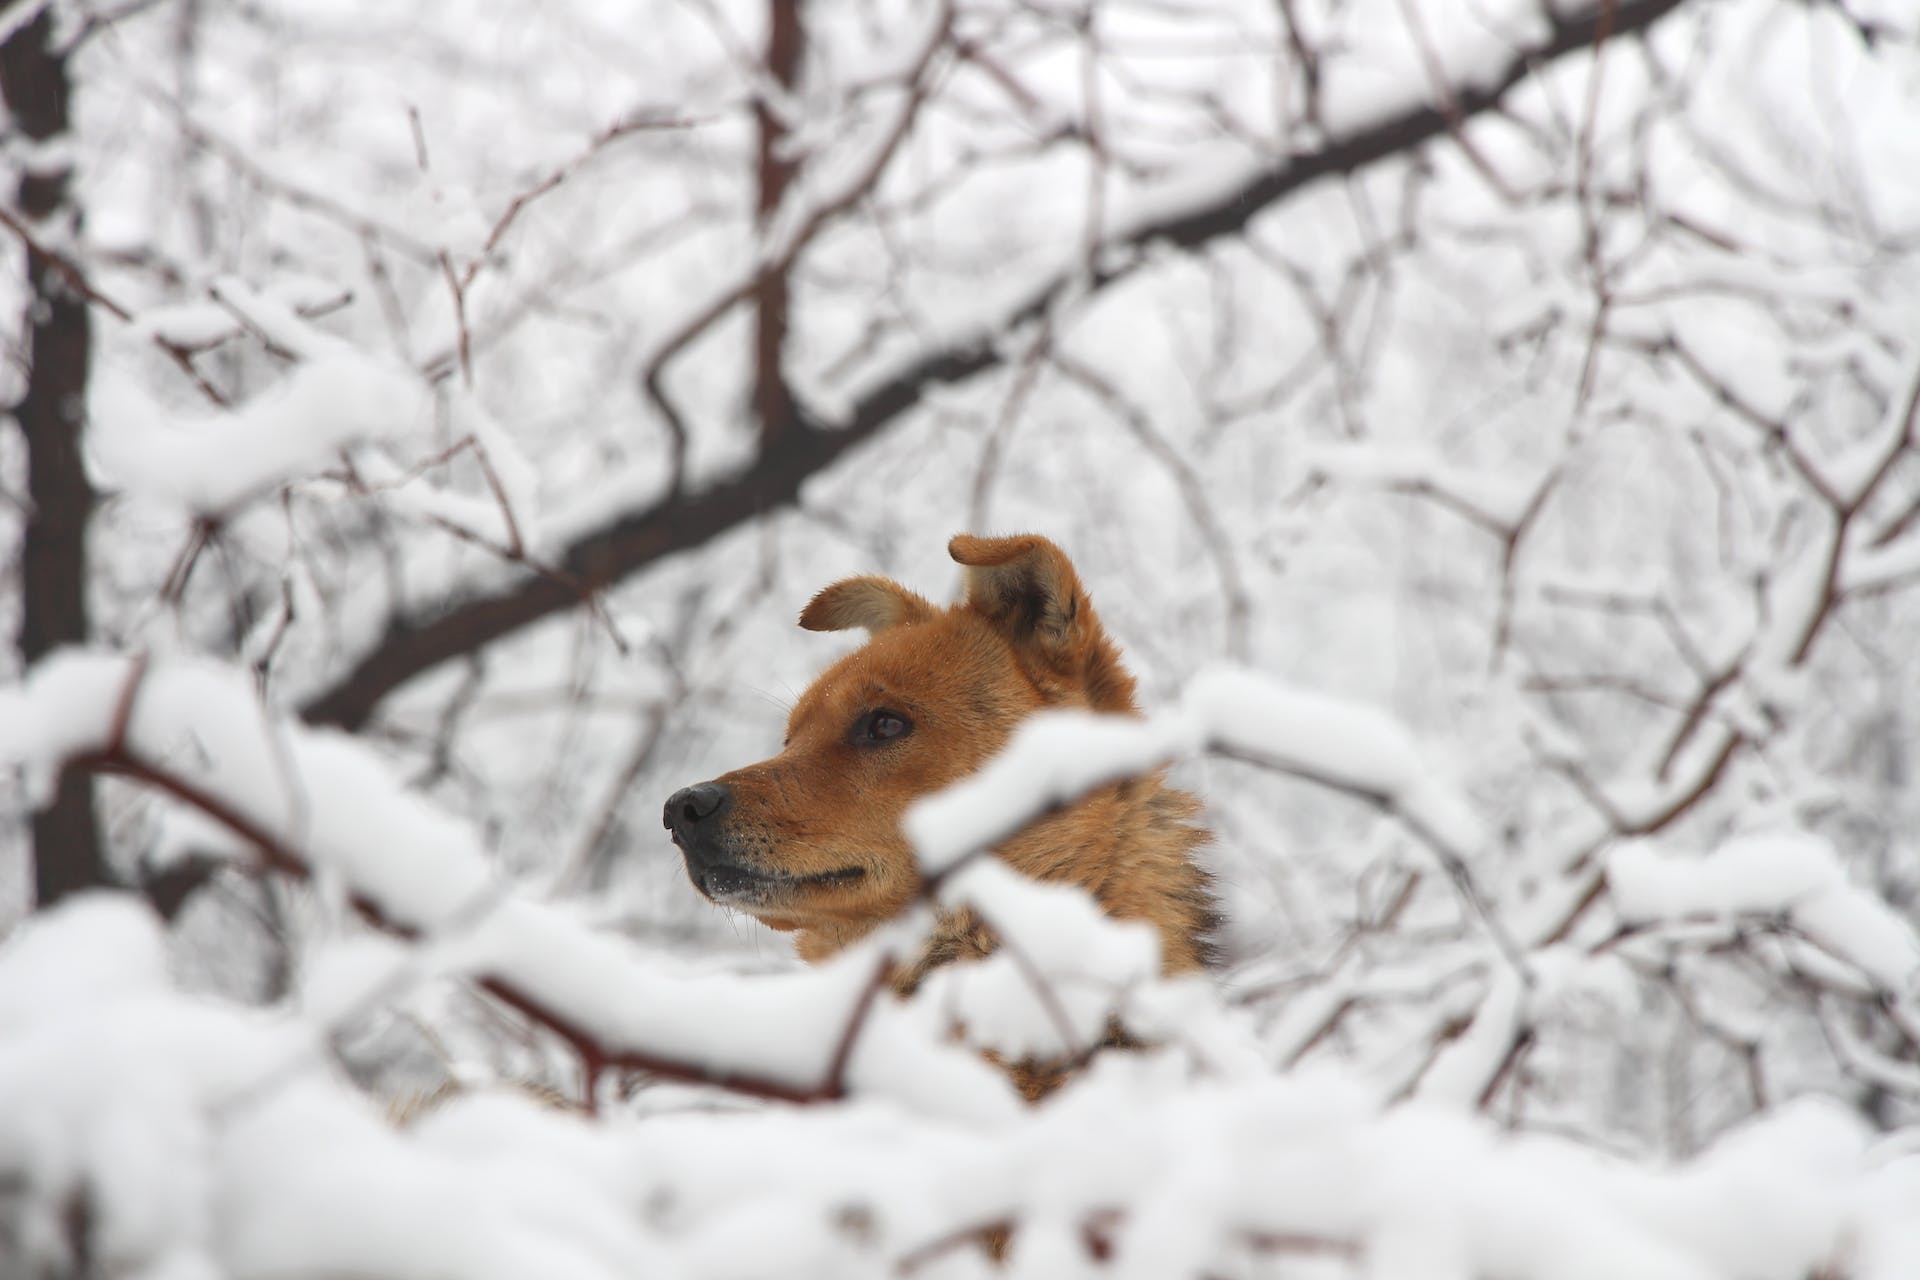 A dog surrounded by snow in a forest